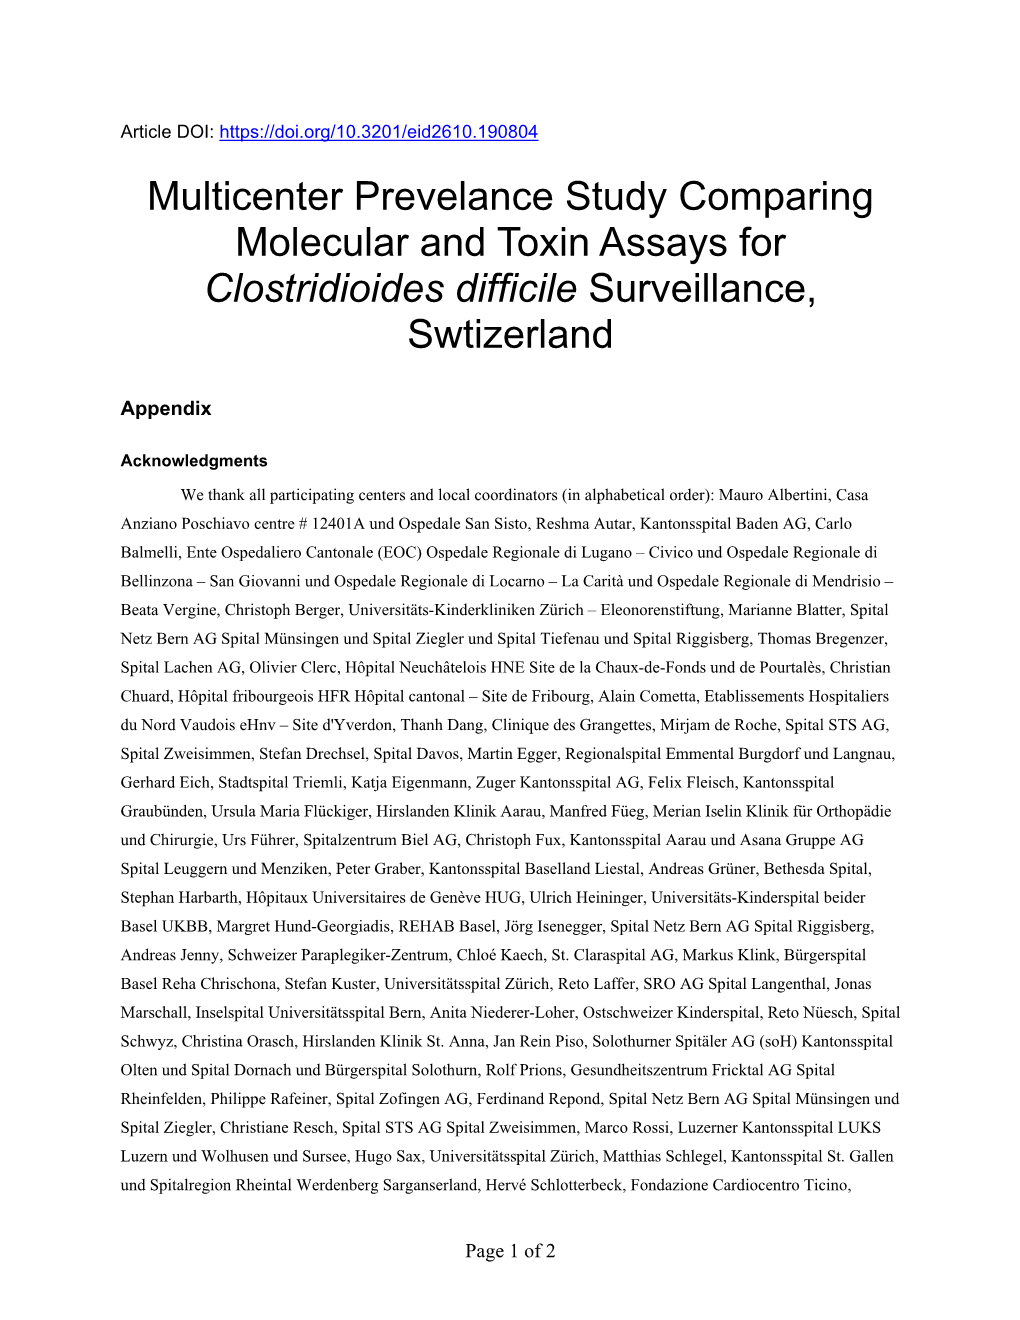 Multicenter Prevelance Study Comparing Molecular and Toxin Assays for Clostridioides Difficile Surveillance, Swtizerland